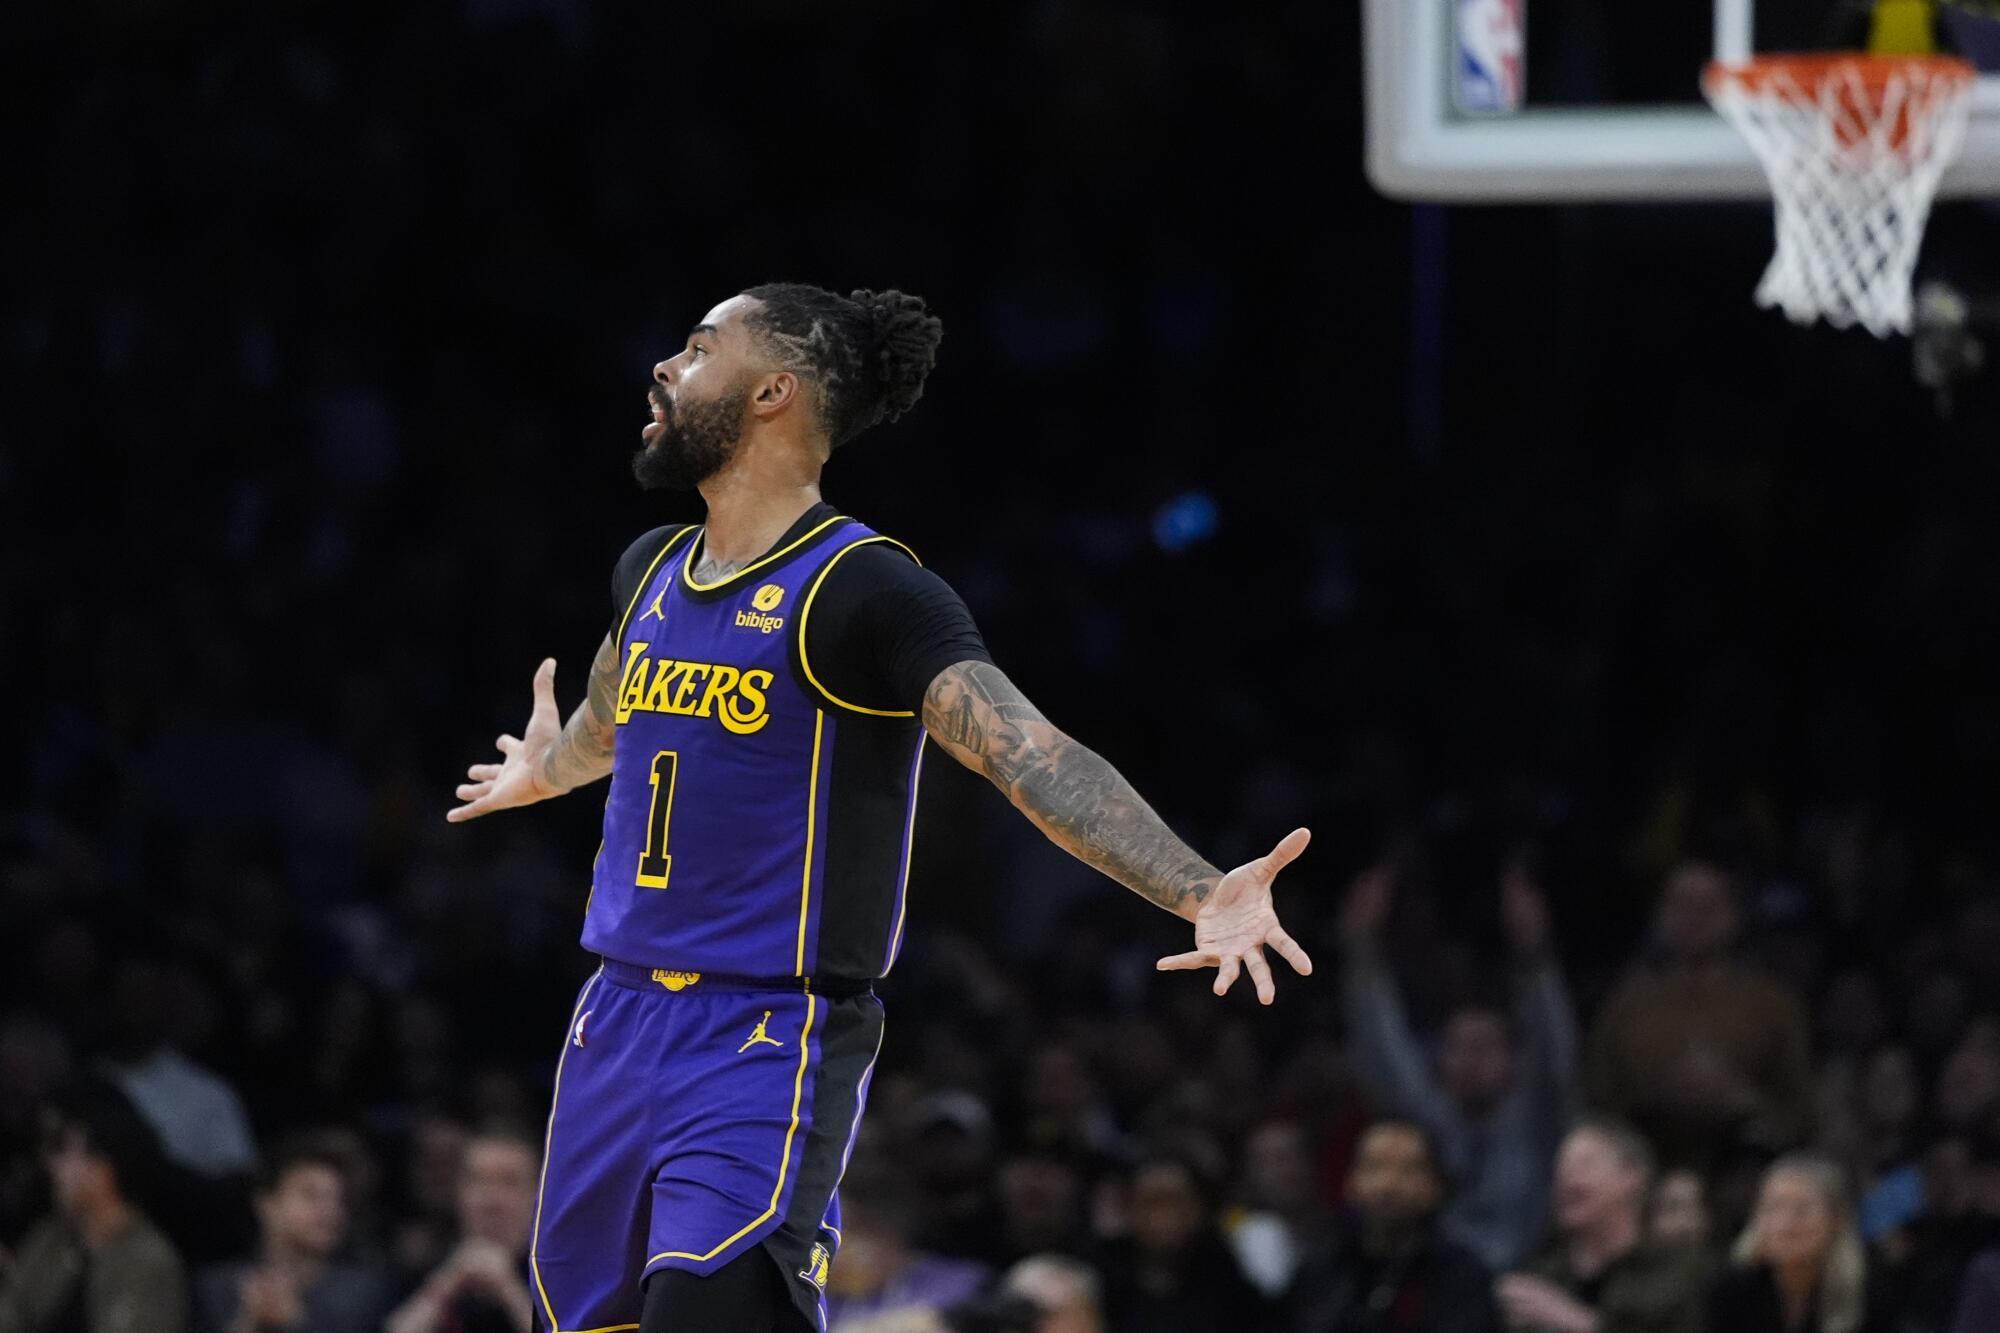 Lakers guard D'Angelo Russell celebrates after making a three-point shot against the Bucks on Friday night.